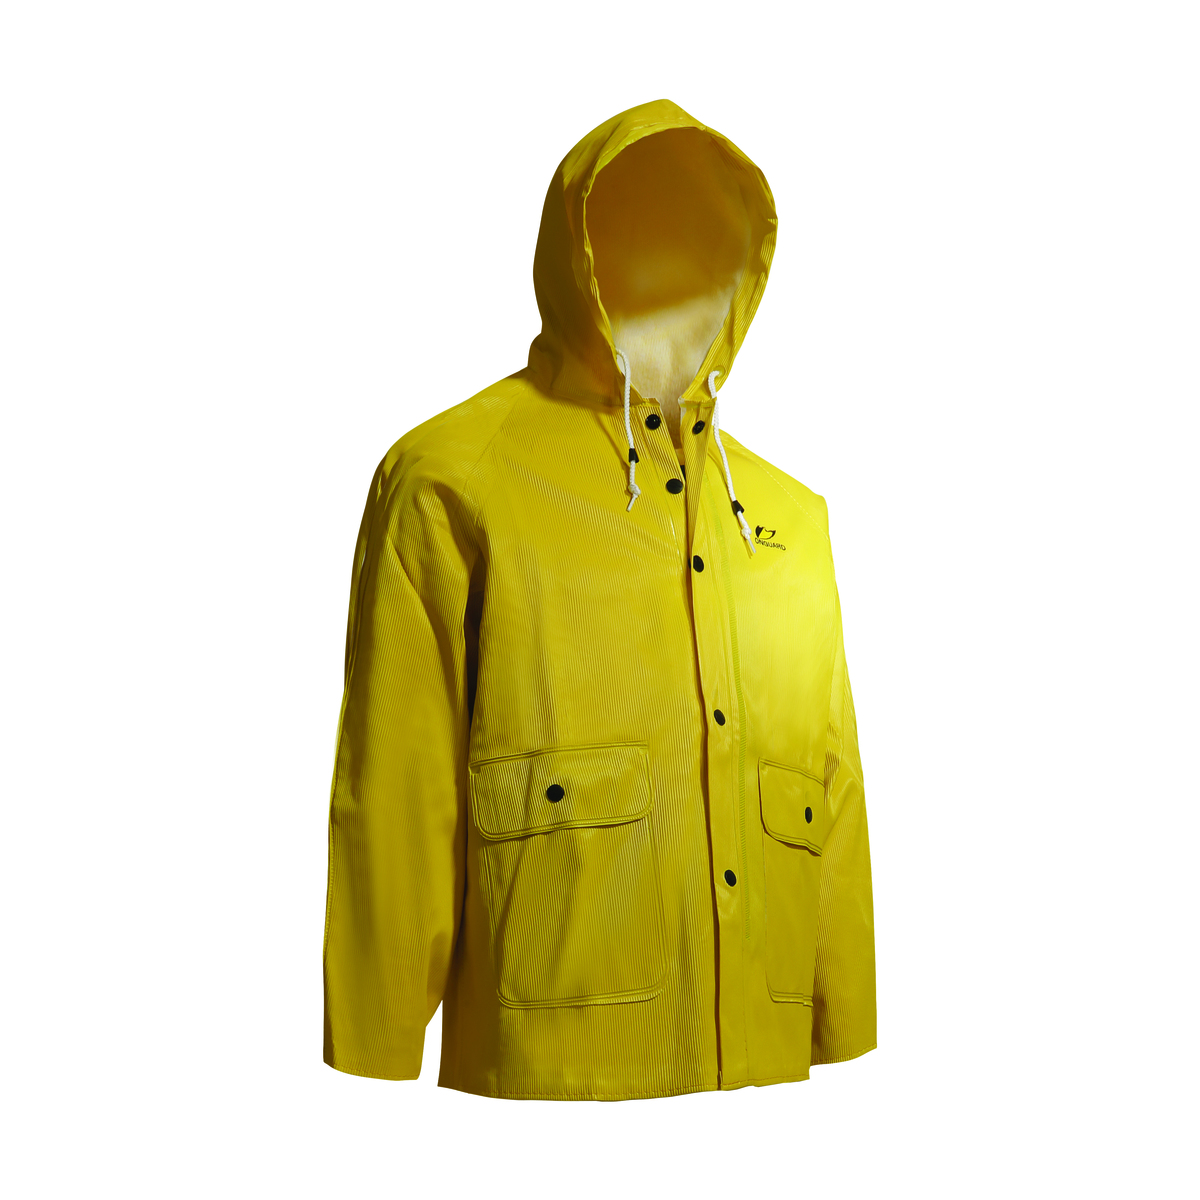 Dunlop® Protective Footwear Small Yellow Webtex .65 mm PVC/Polyester Rain Jacket With Attached Hood